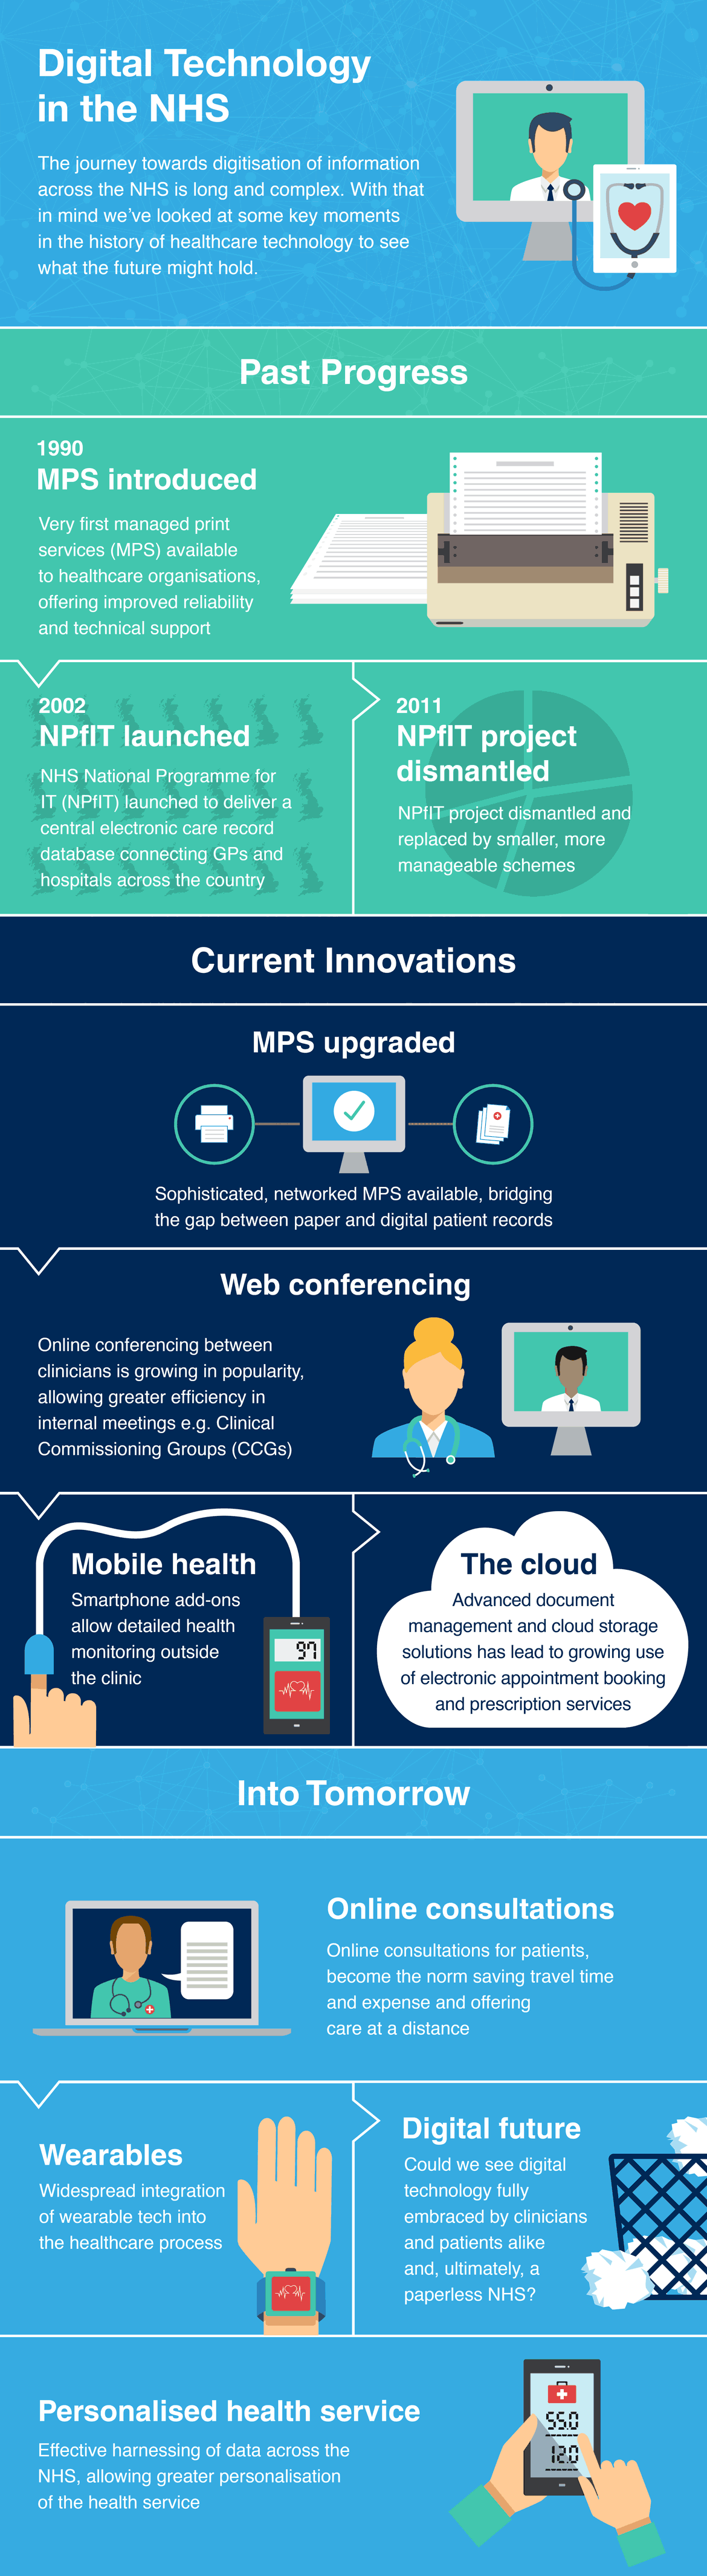 Brother healthcare infographic charting the progress of the NHS